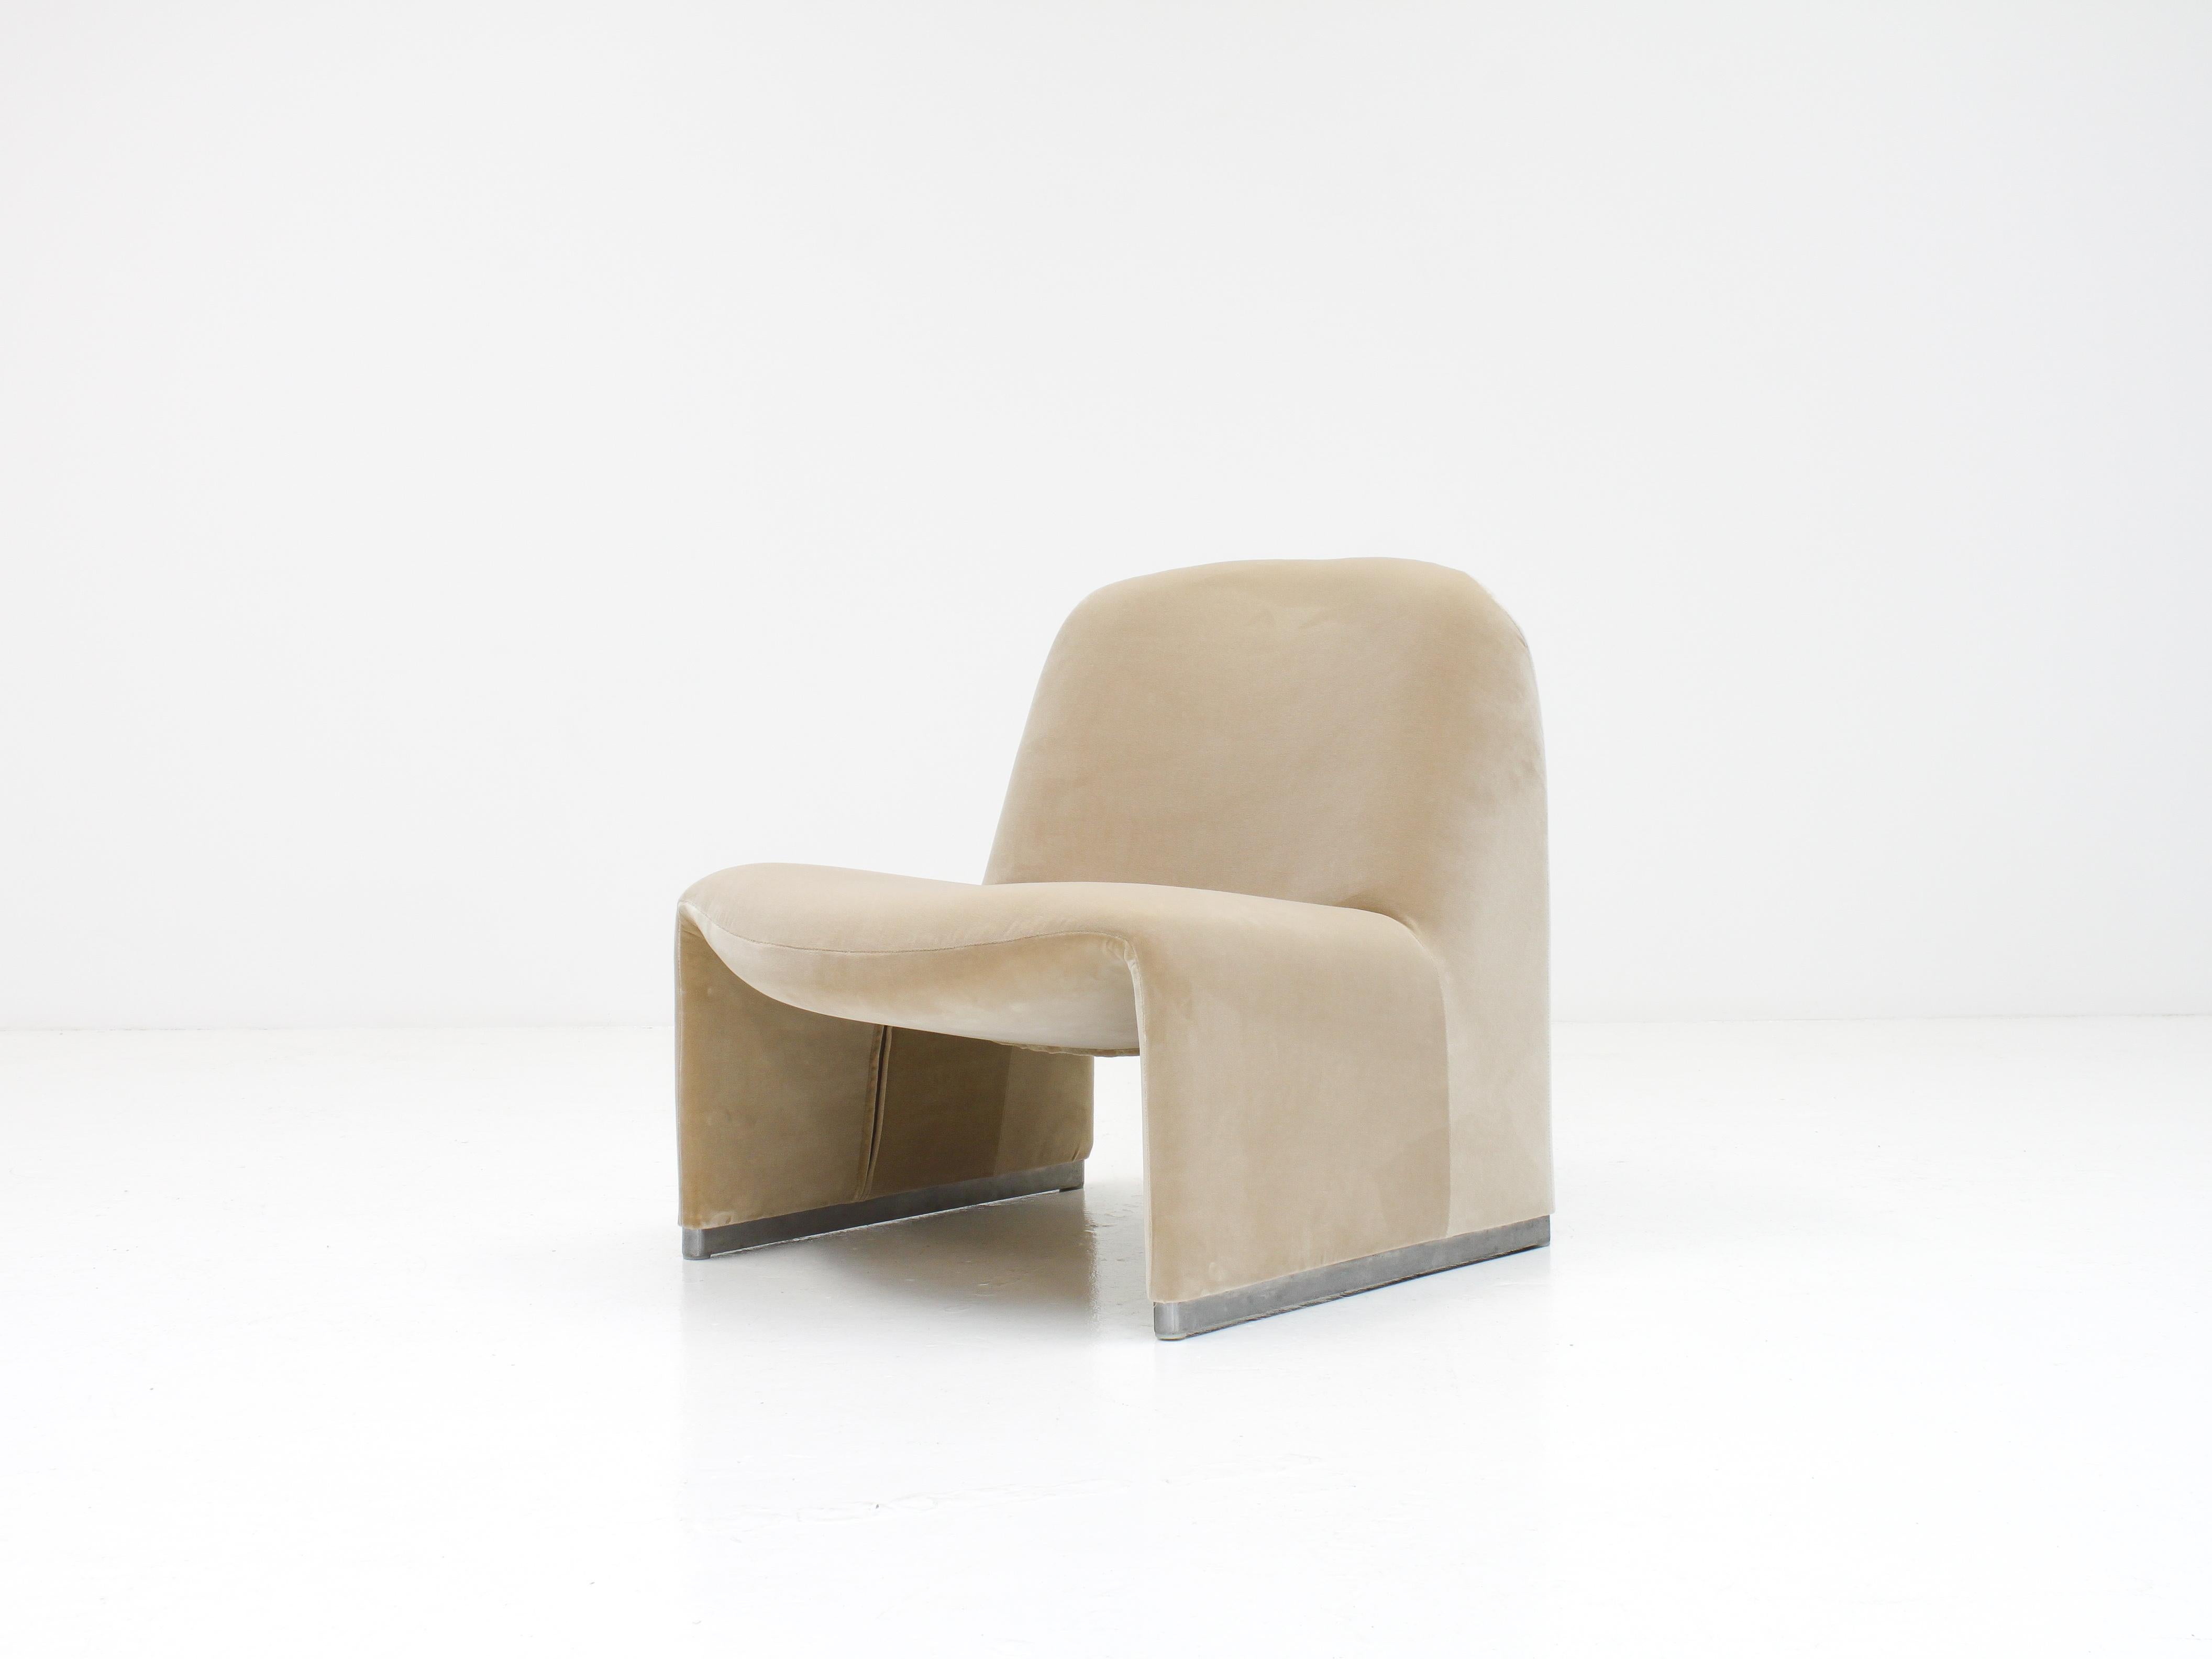 A single Giancarlo Piretti “Alky” chair newly upholstered in Designers Guild linen colored cotton velvet. 

Manufactured by Artifort in the 1970s.

The organic shape offers a minimal appearance but also comfort.

Foam restored where required and